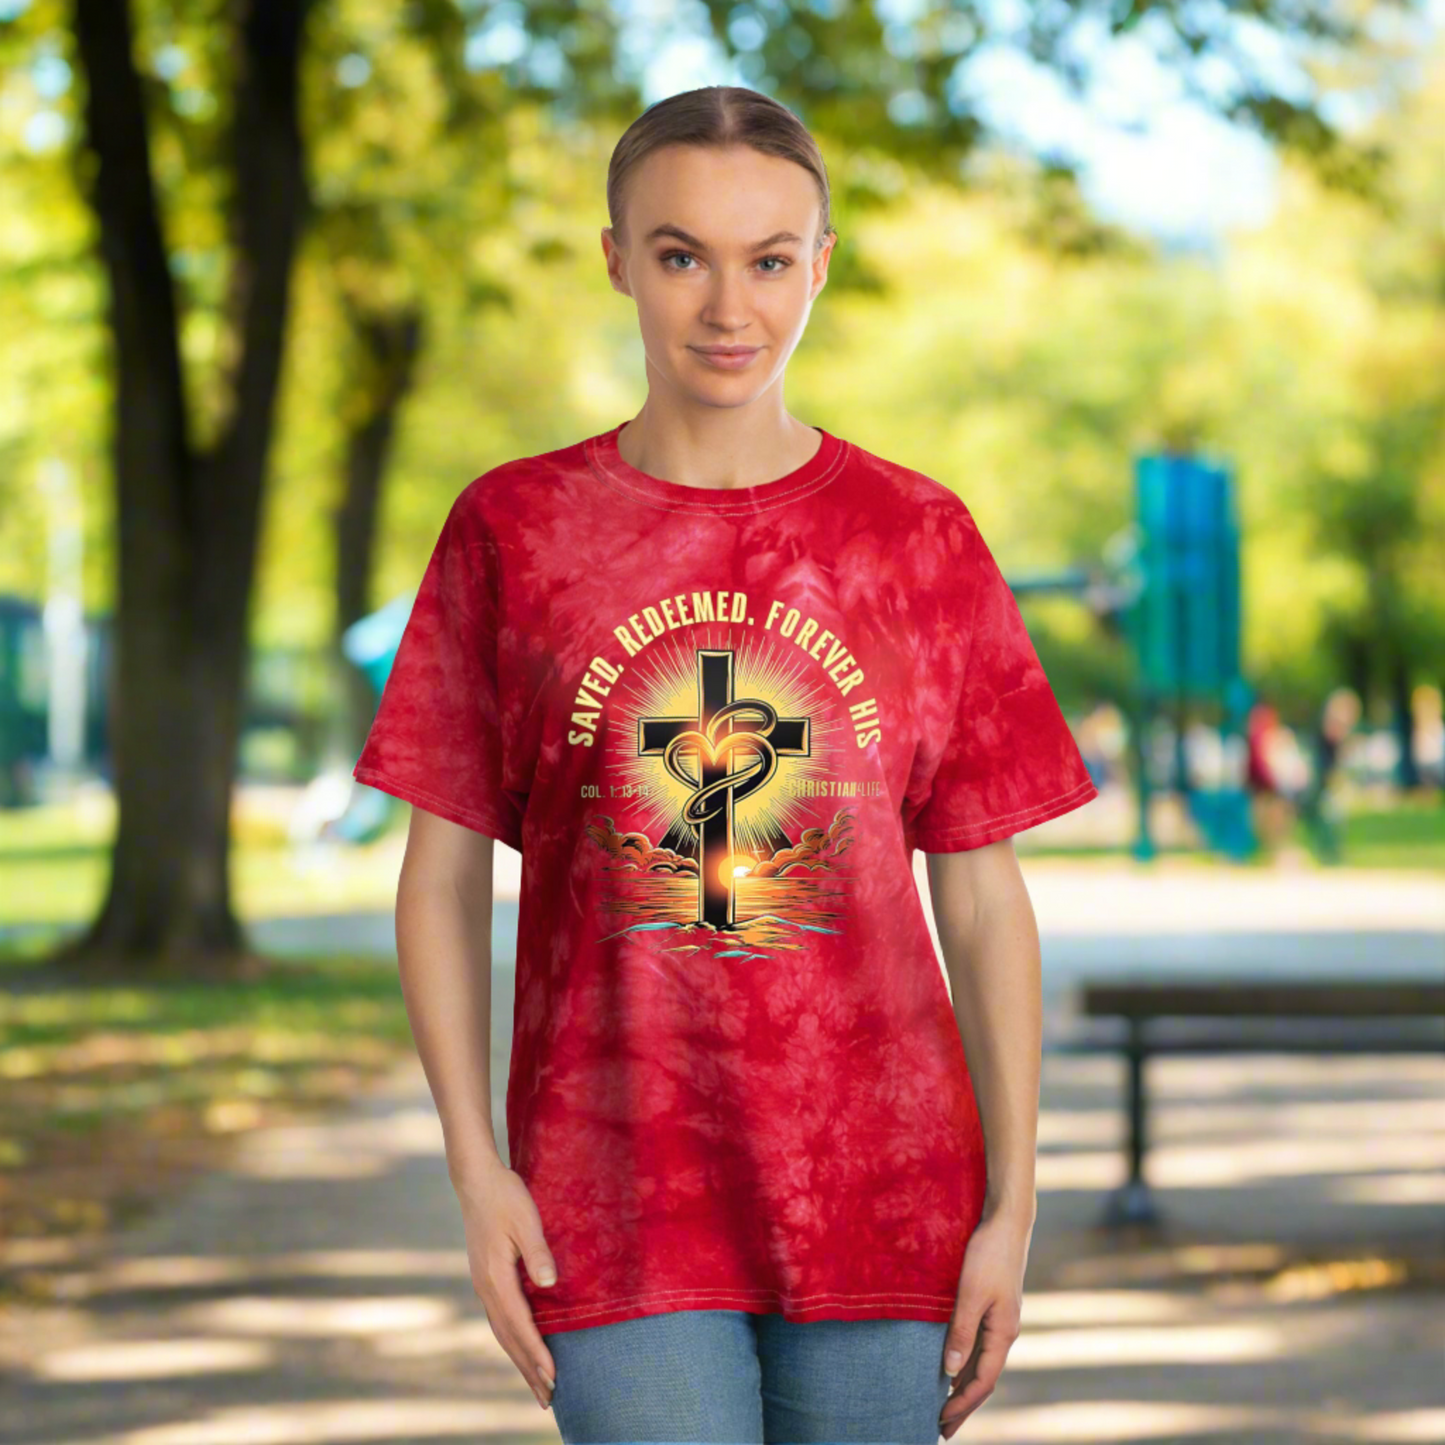 Unisex "Saved, Redeemed, Forever His" Christian Tie-Dye T-shirt